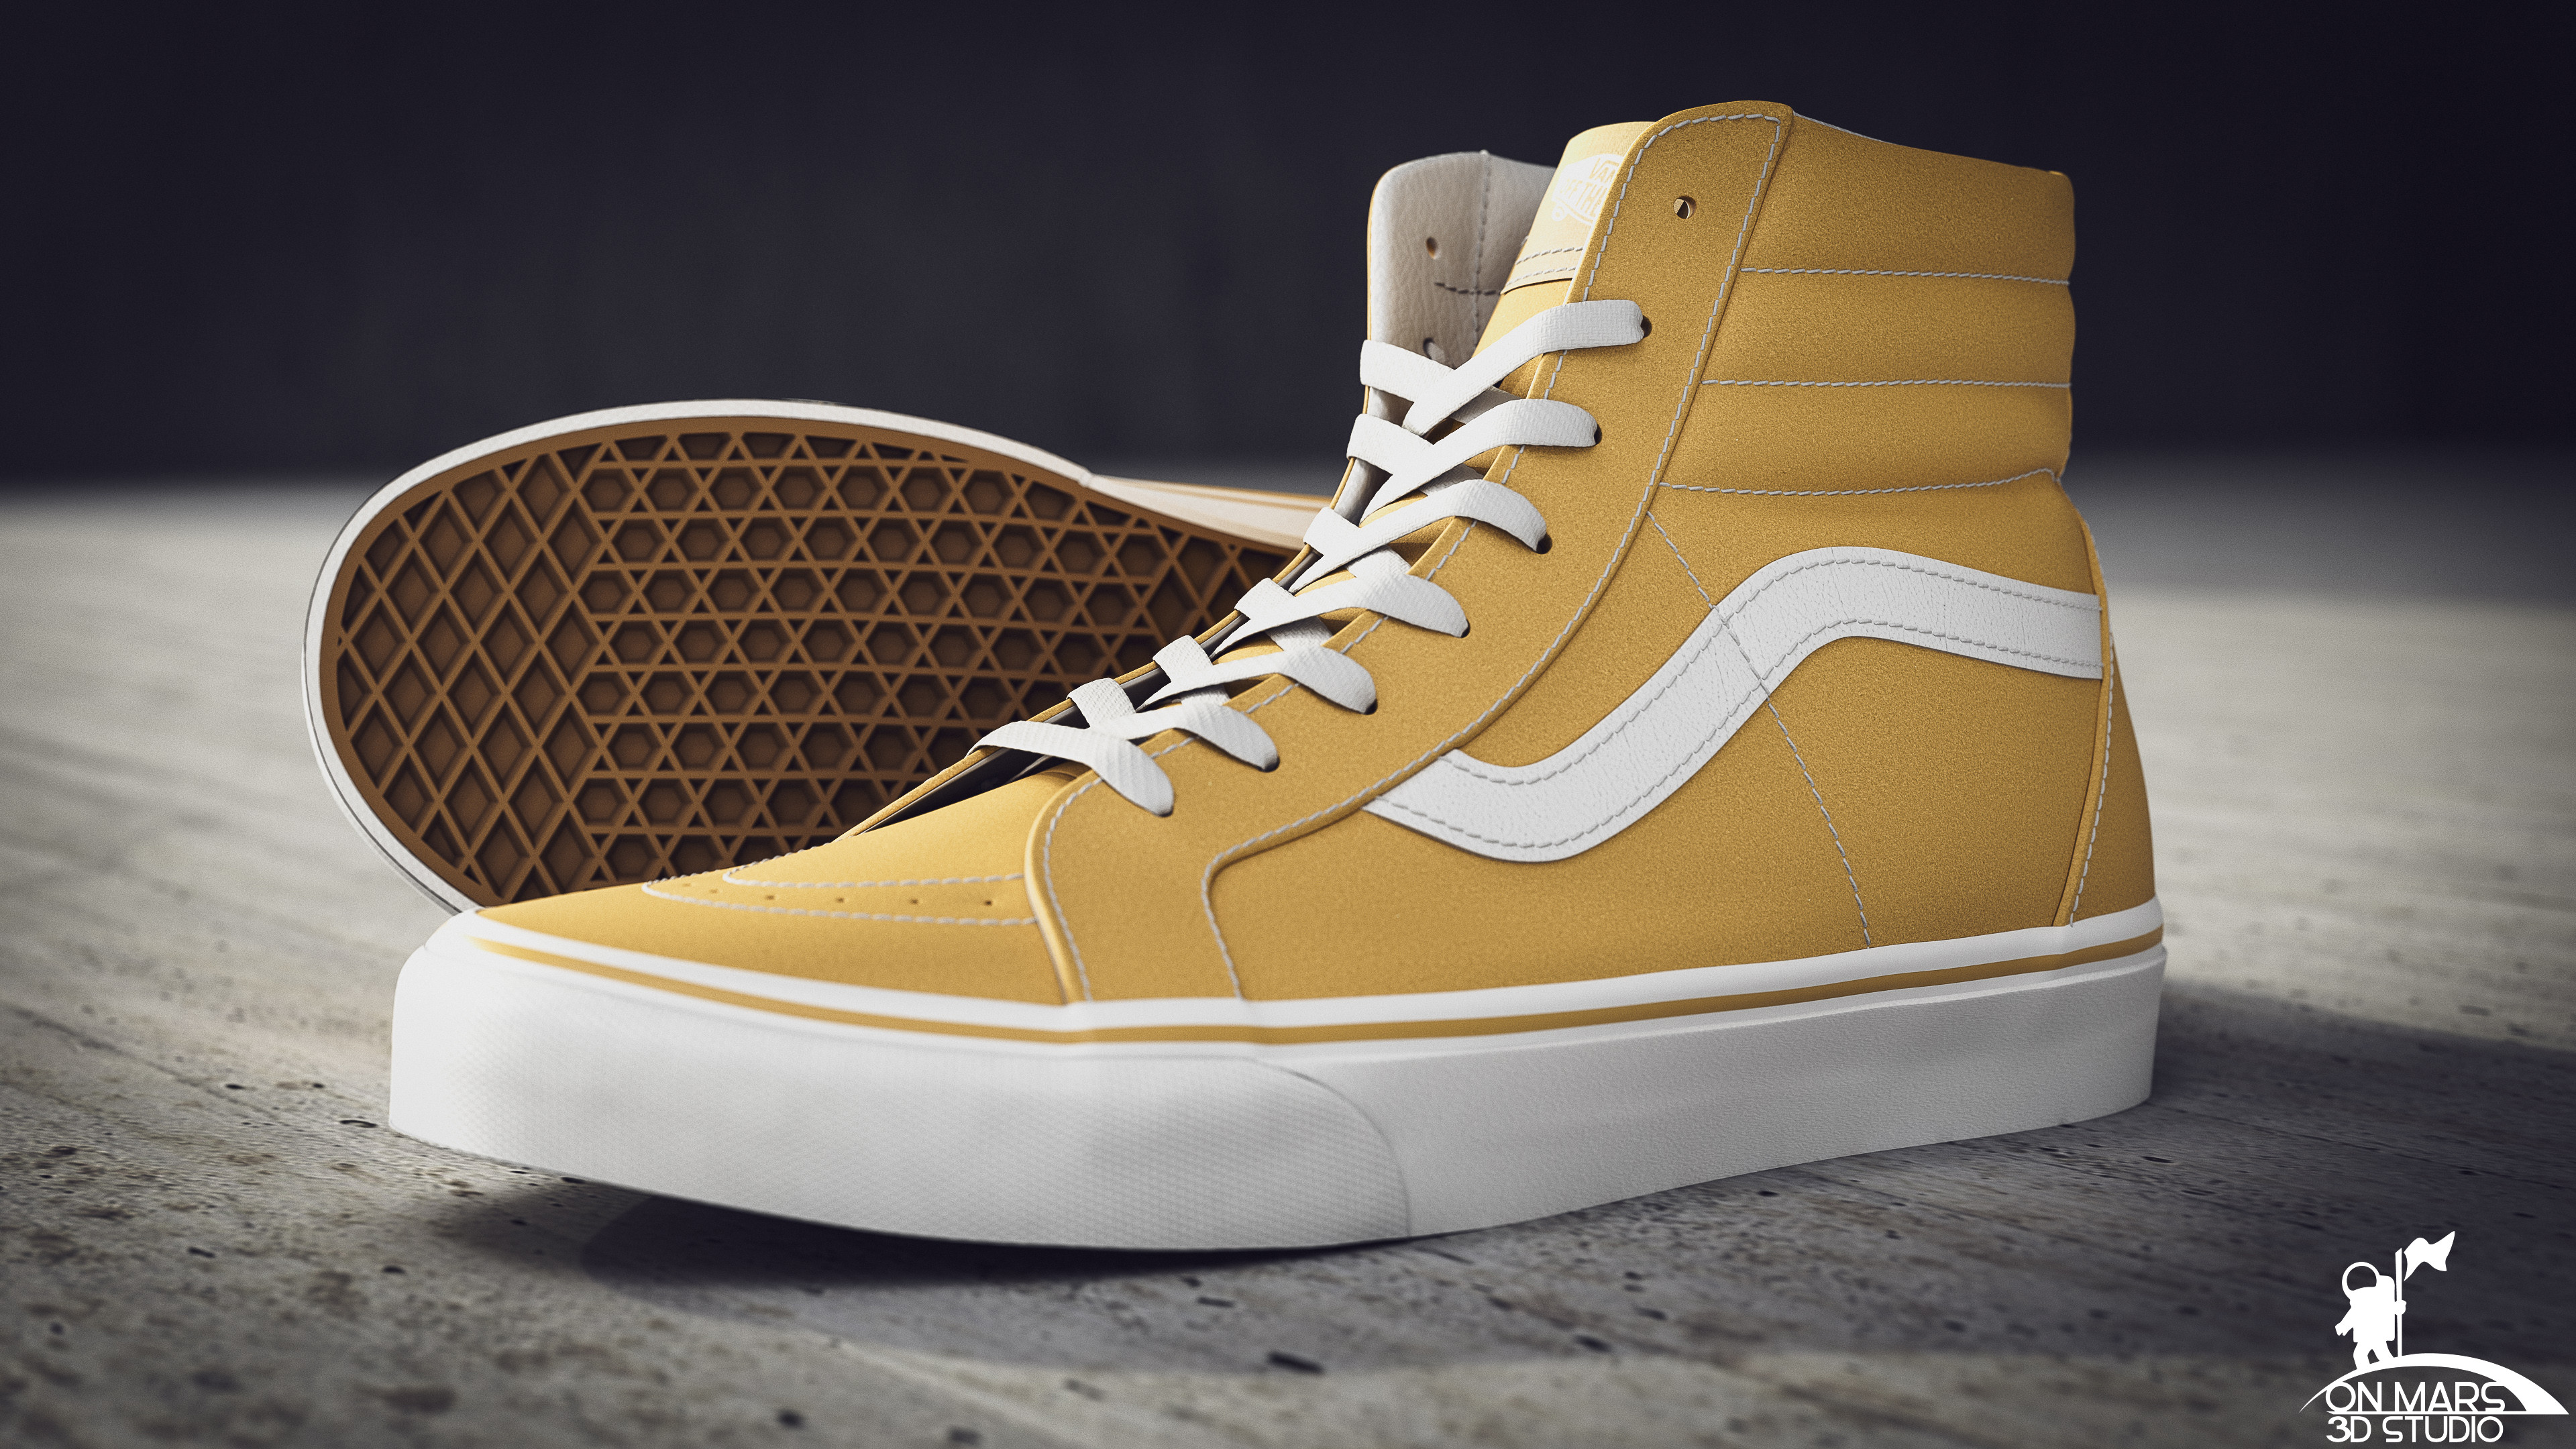 Blonde Suede using Substance 8k textures.